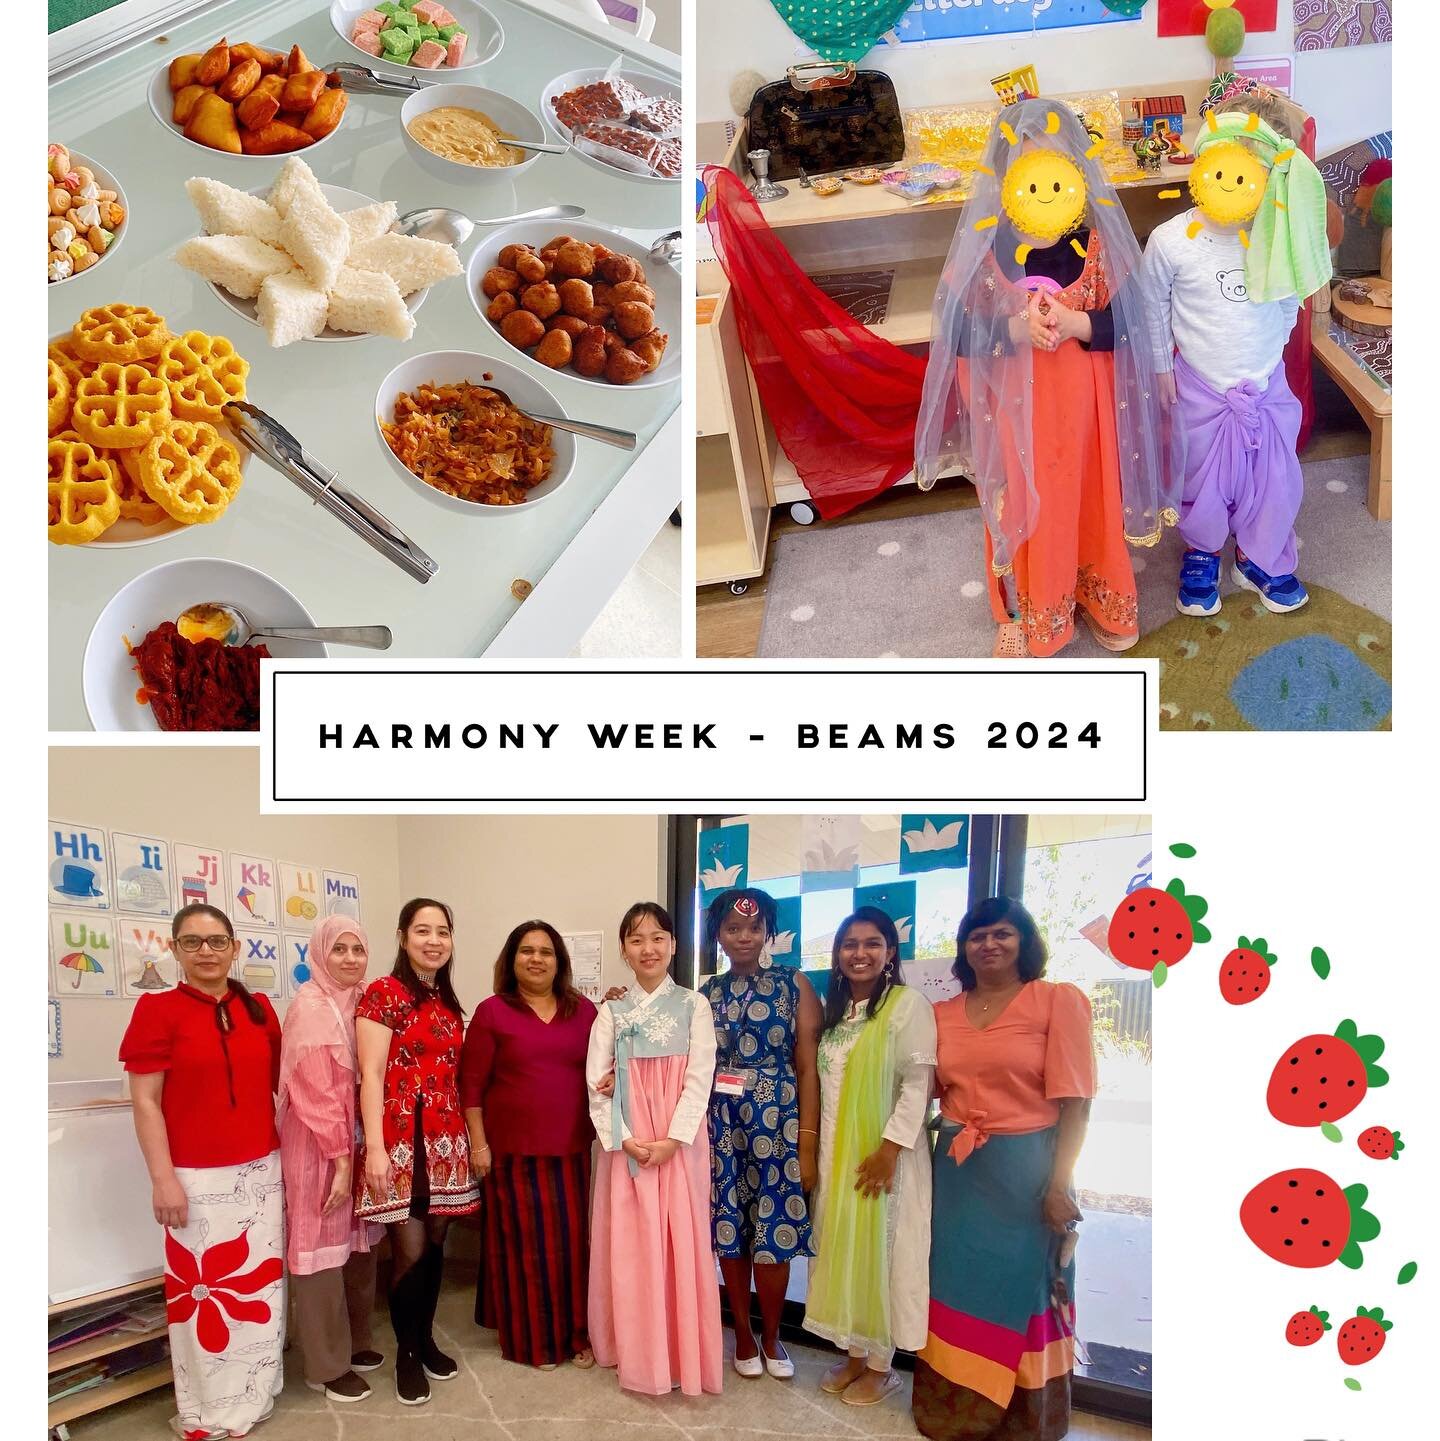 🧡 Happy Harmony Week! 🧡 
Today the staff at Beams wore their traditional clothing to celebrate Harmony Week at Beams! In addition the staff members all brought in their own cultural cuisine to share.
To celebrate, children were also taught about di